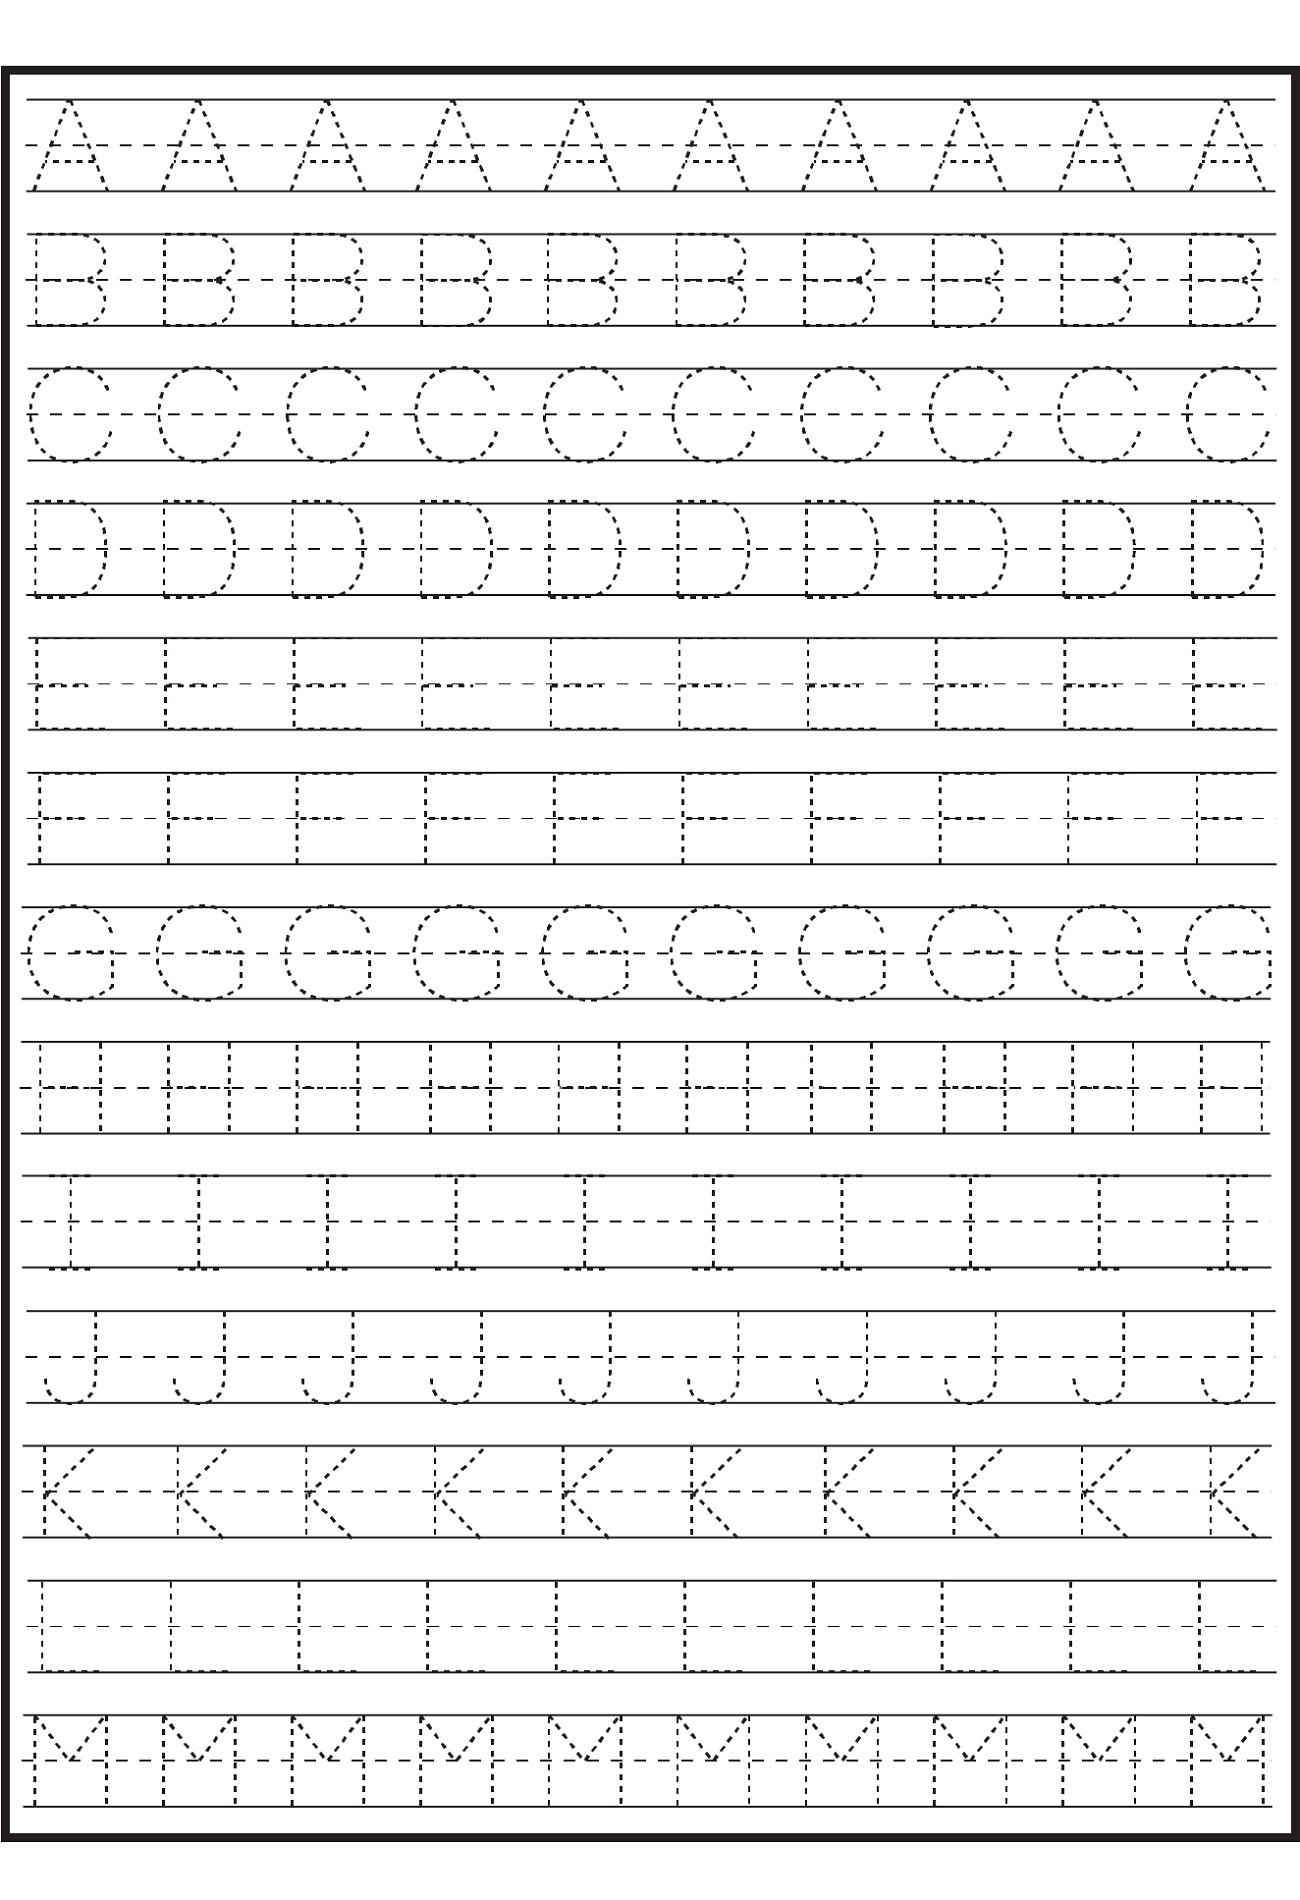 Tracing Alphabet For Writing Practice intended for Tracing Letters Practice Sheets